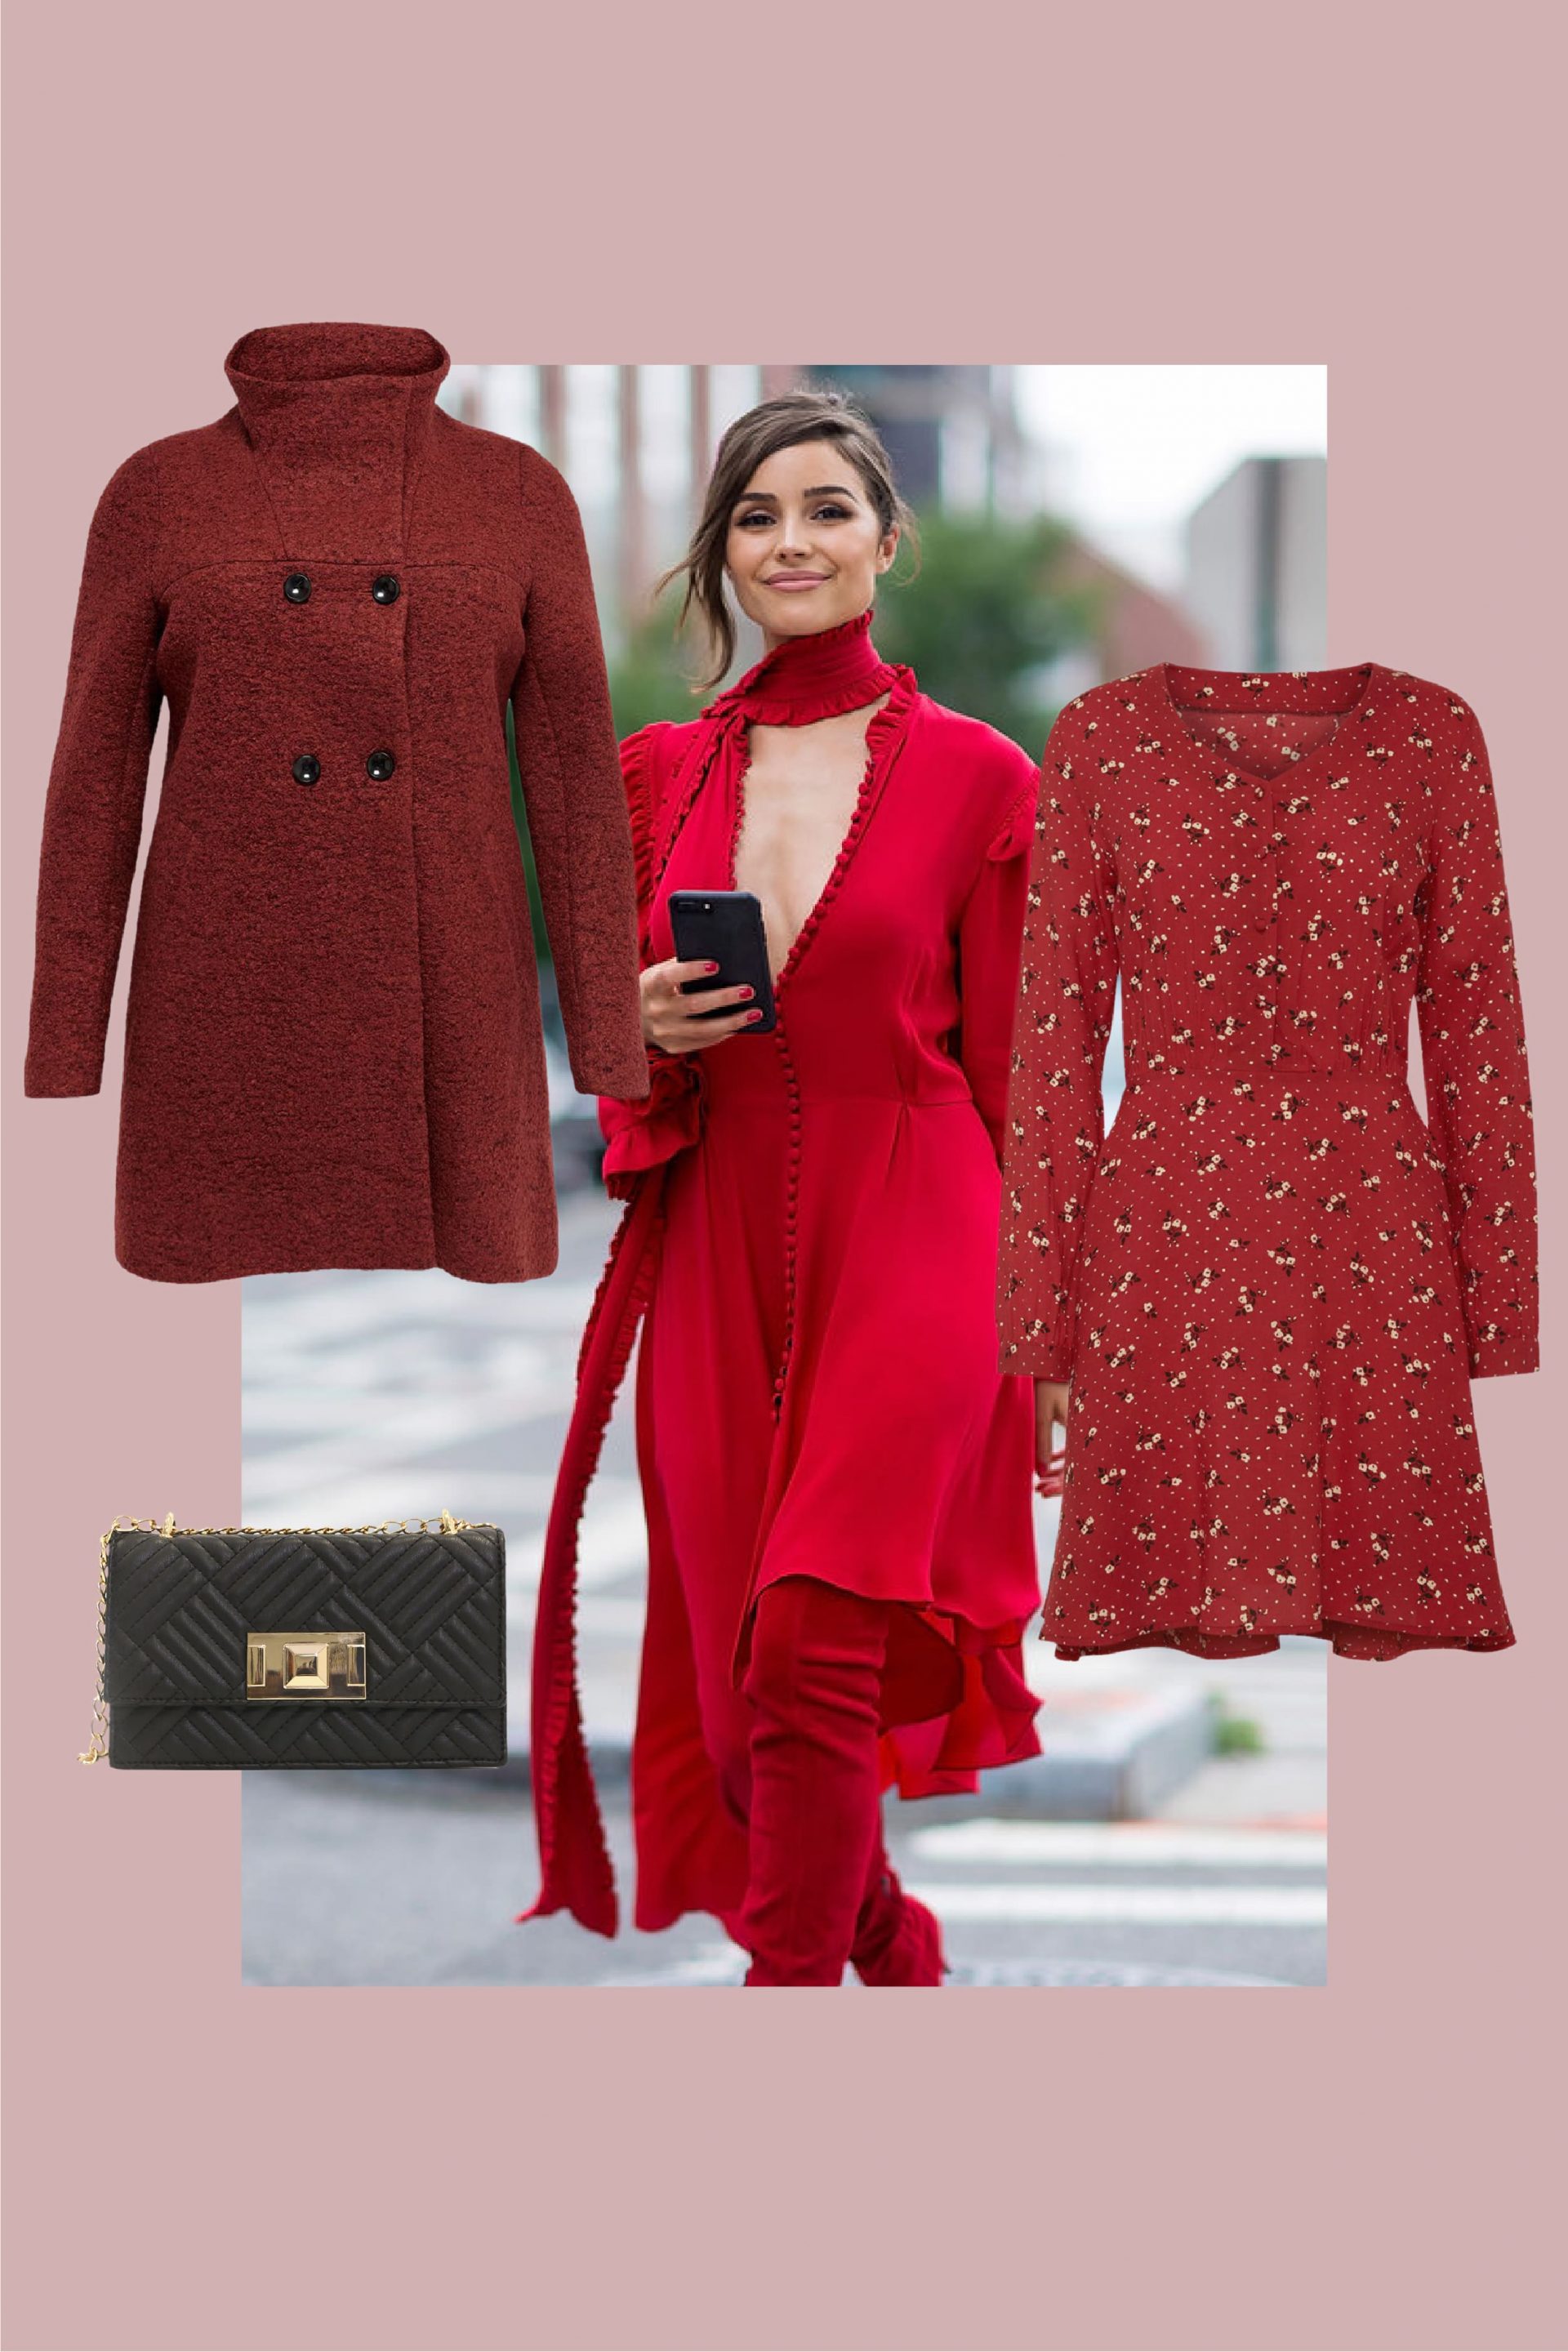 Il total look rosso